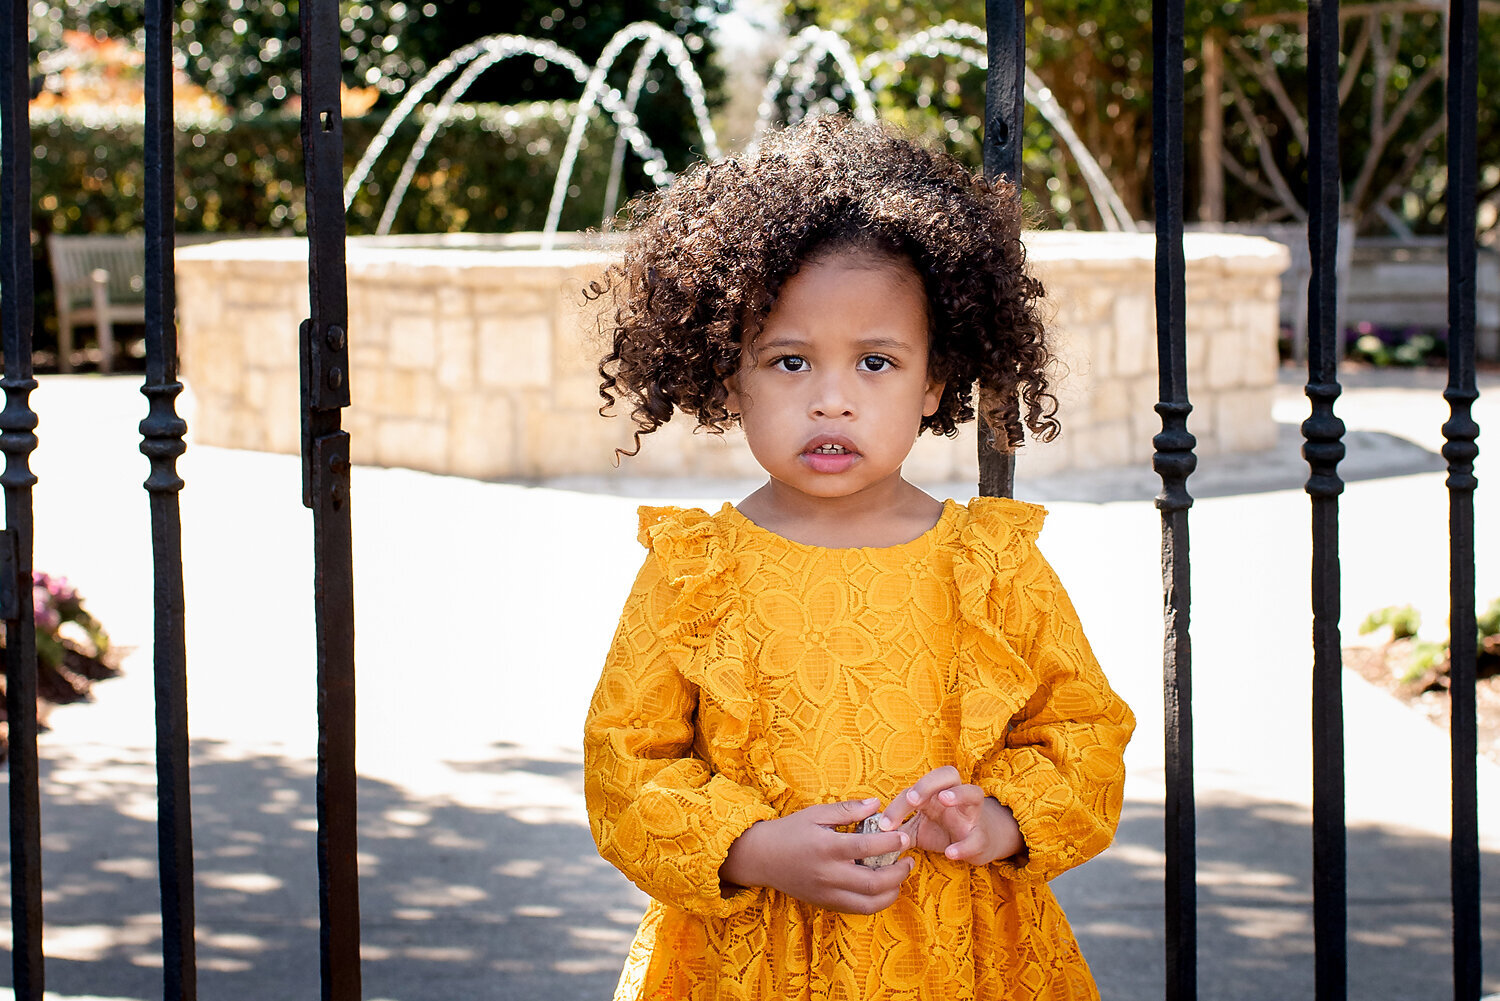 An adorable 3 year old girl wearing a yellow dress standing in front of an iron gate.